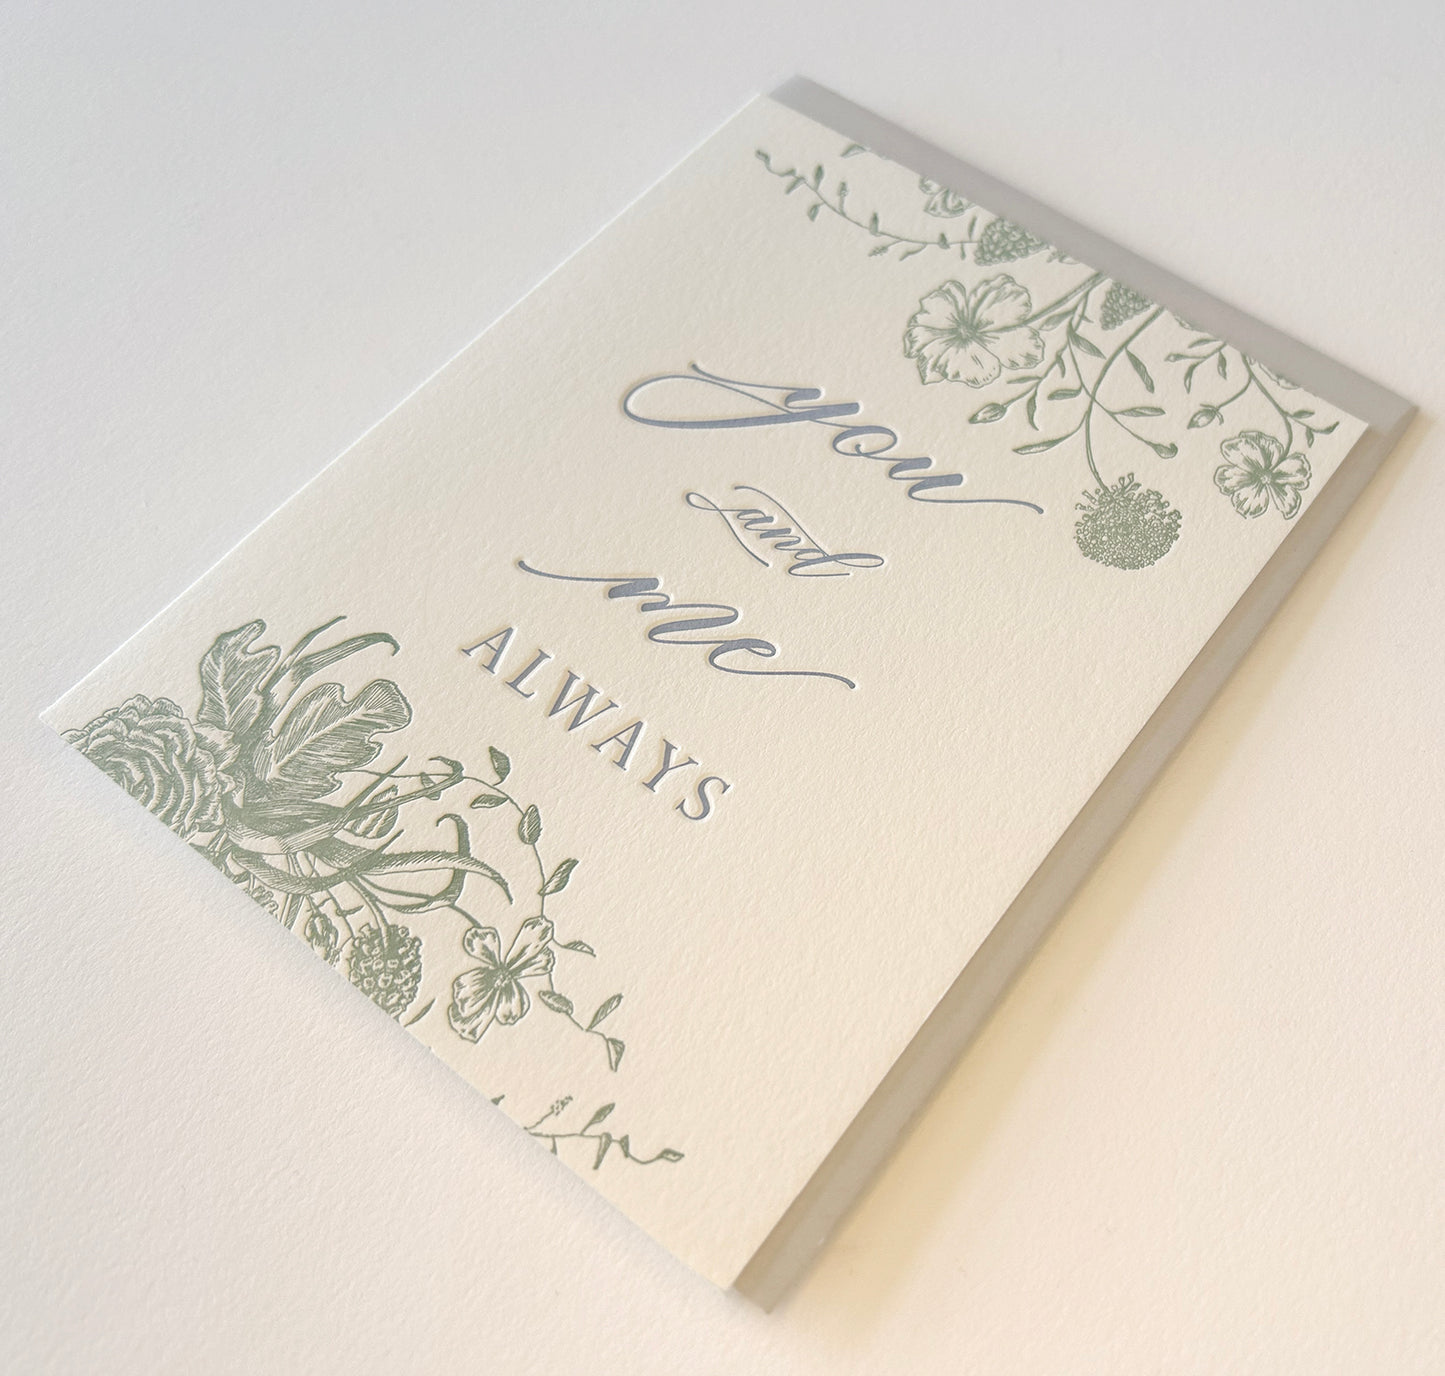 Letterpress love card with florals that says "You and me always" by Rust Belt Love